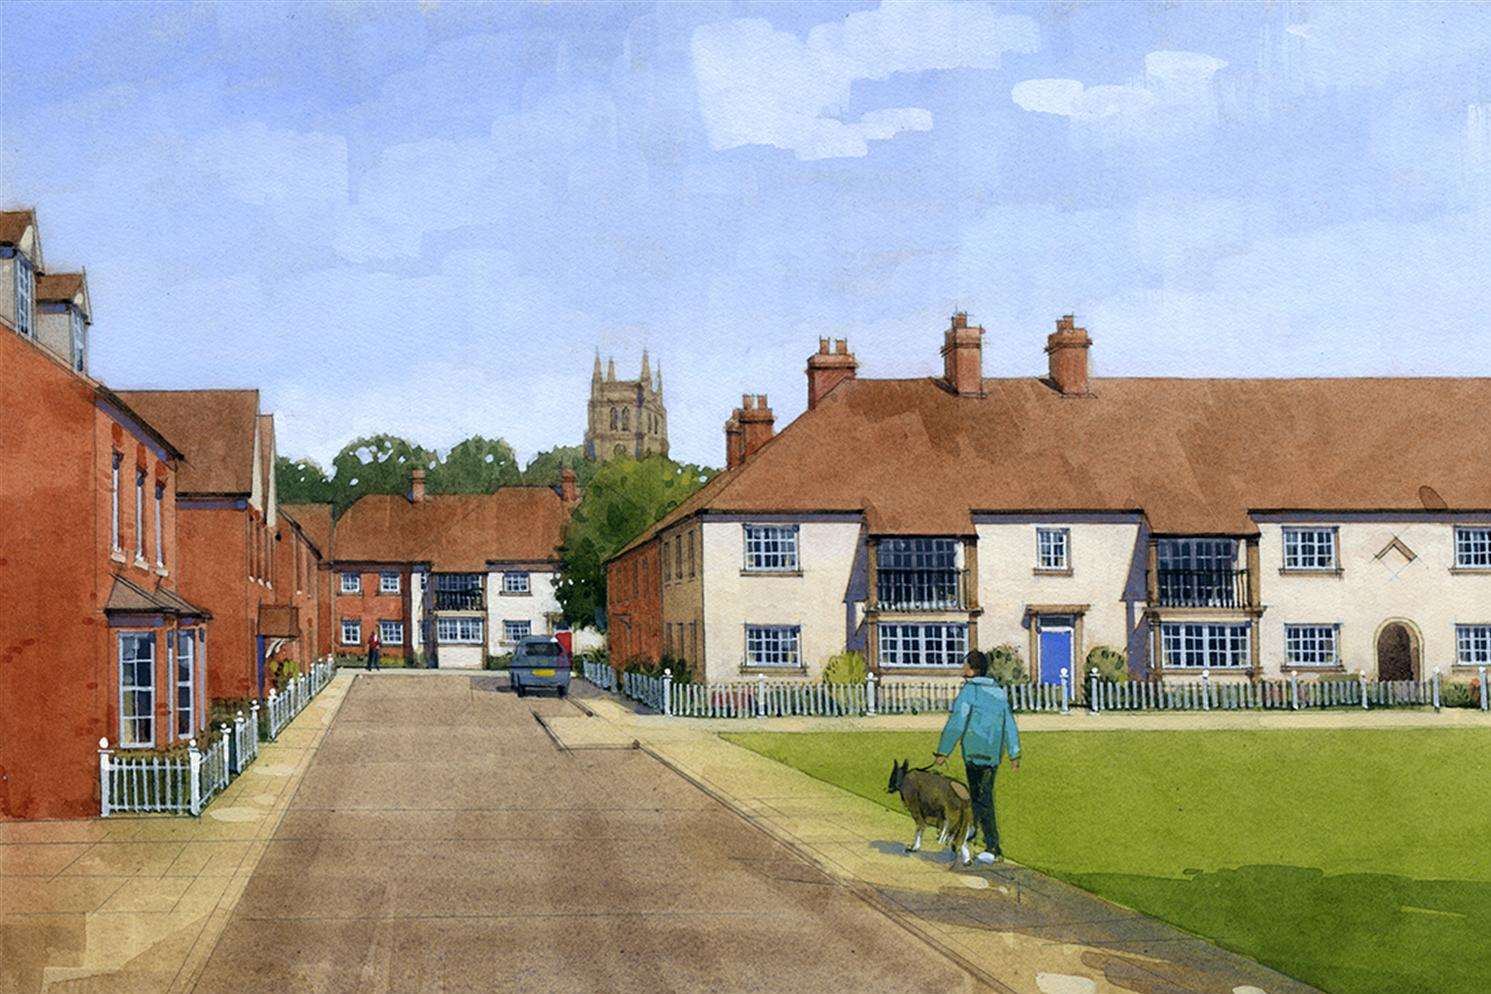 An artist's impression of what the homes in Tent1A will look like, with the tower of St Mildred's Church being the focal point.